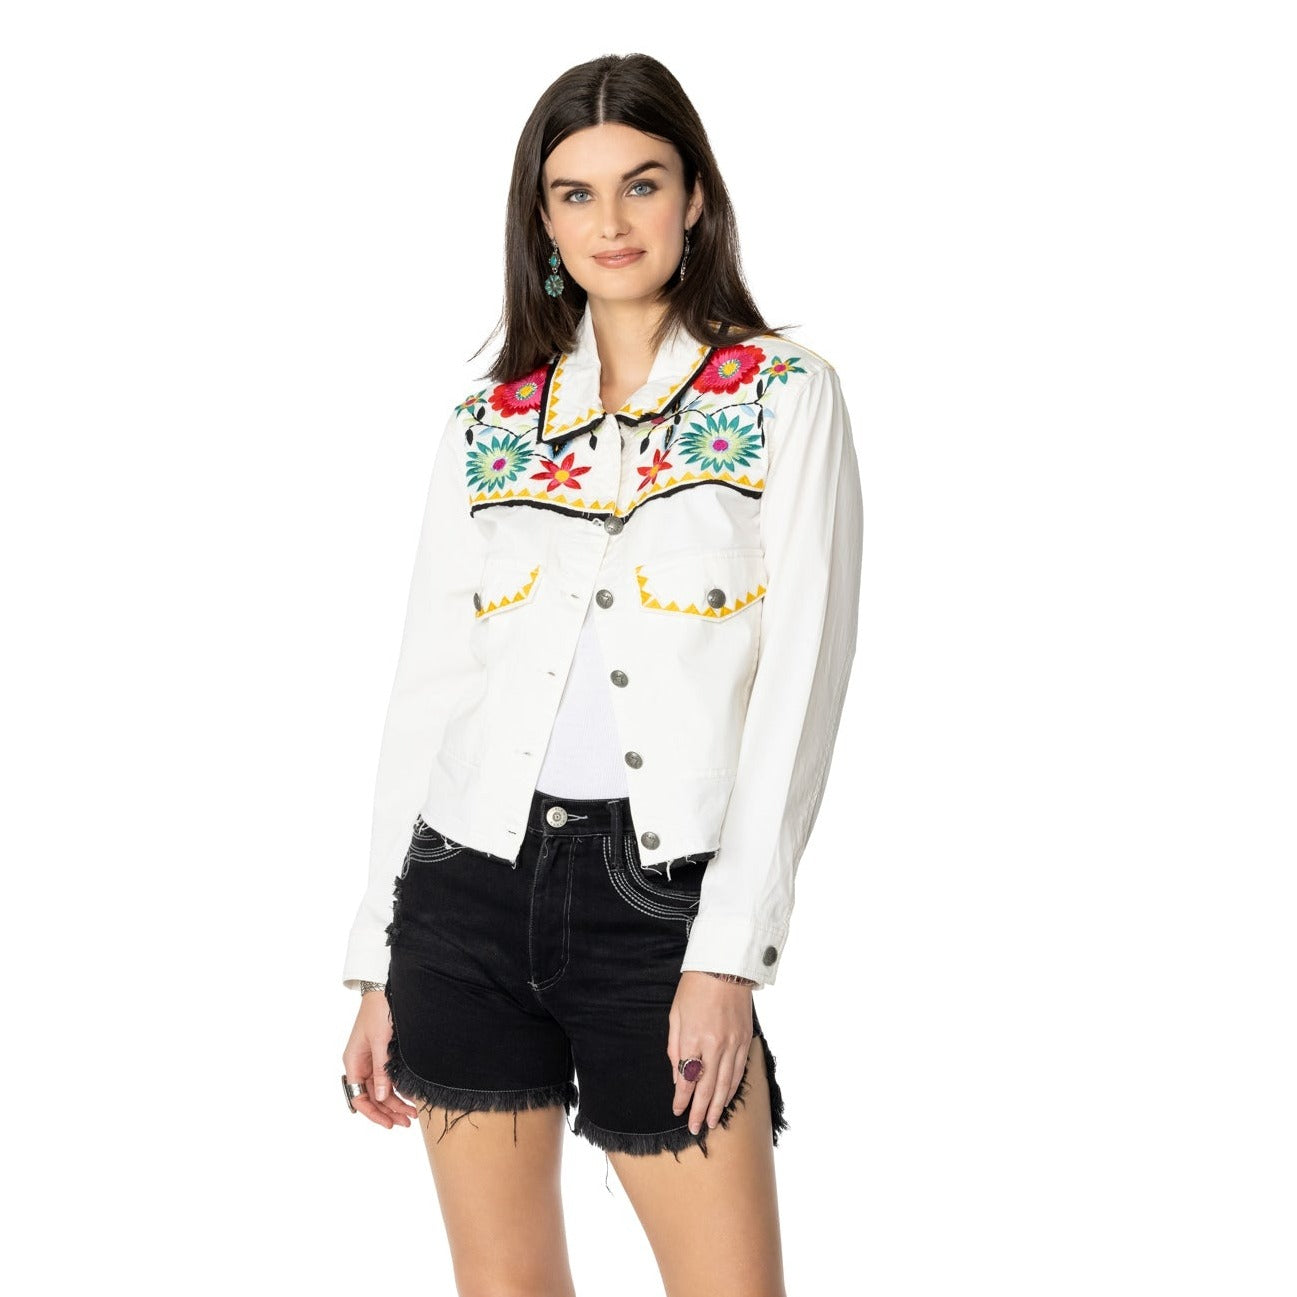 DDR Que Milagro Cotton Jacket in sea salt / white at 6whiskey six whisky by double d ranch womens spring style number C3057 folk forary